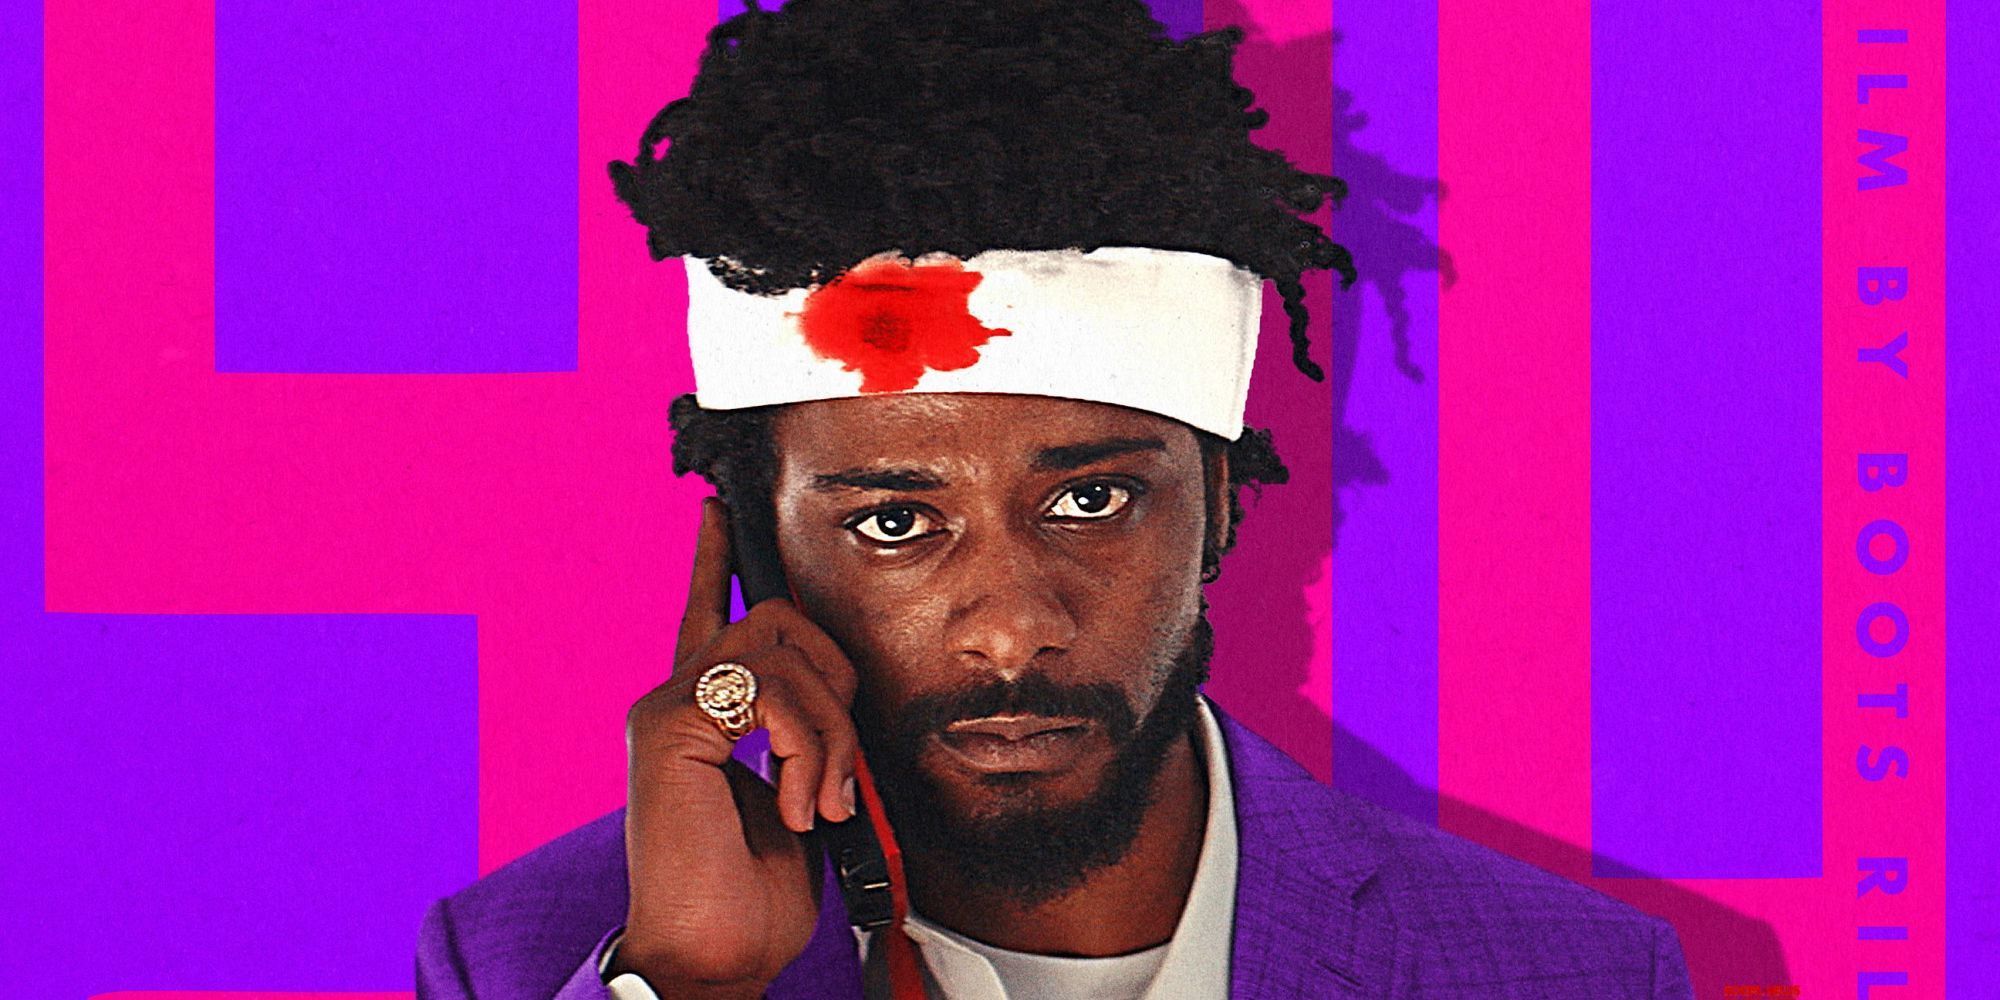 Lakeith Stanfield on the phone in the poster for the film Sorry To Bother You.